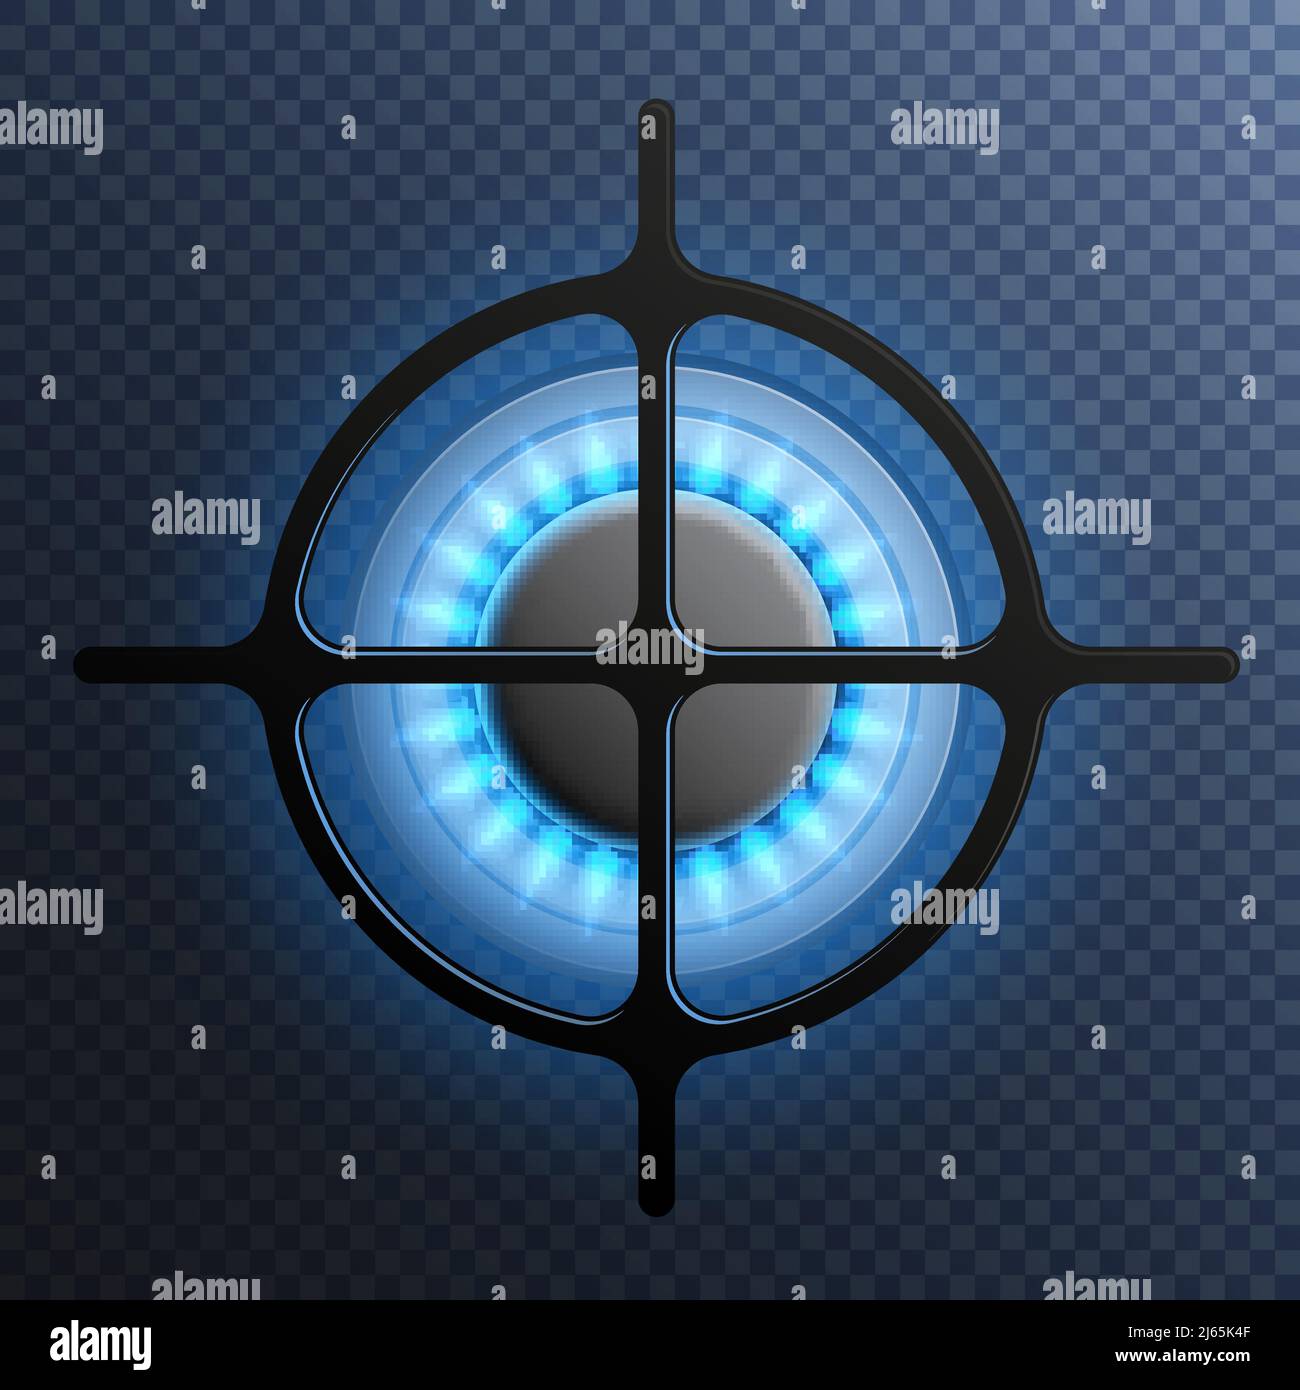 Realistic gas flame burner plate composition with transparent background and blue flame vector illustration Stock Vector